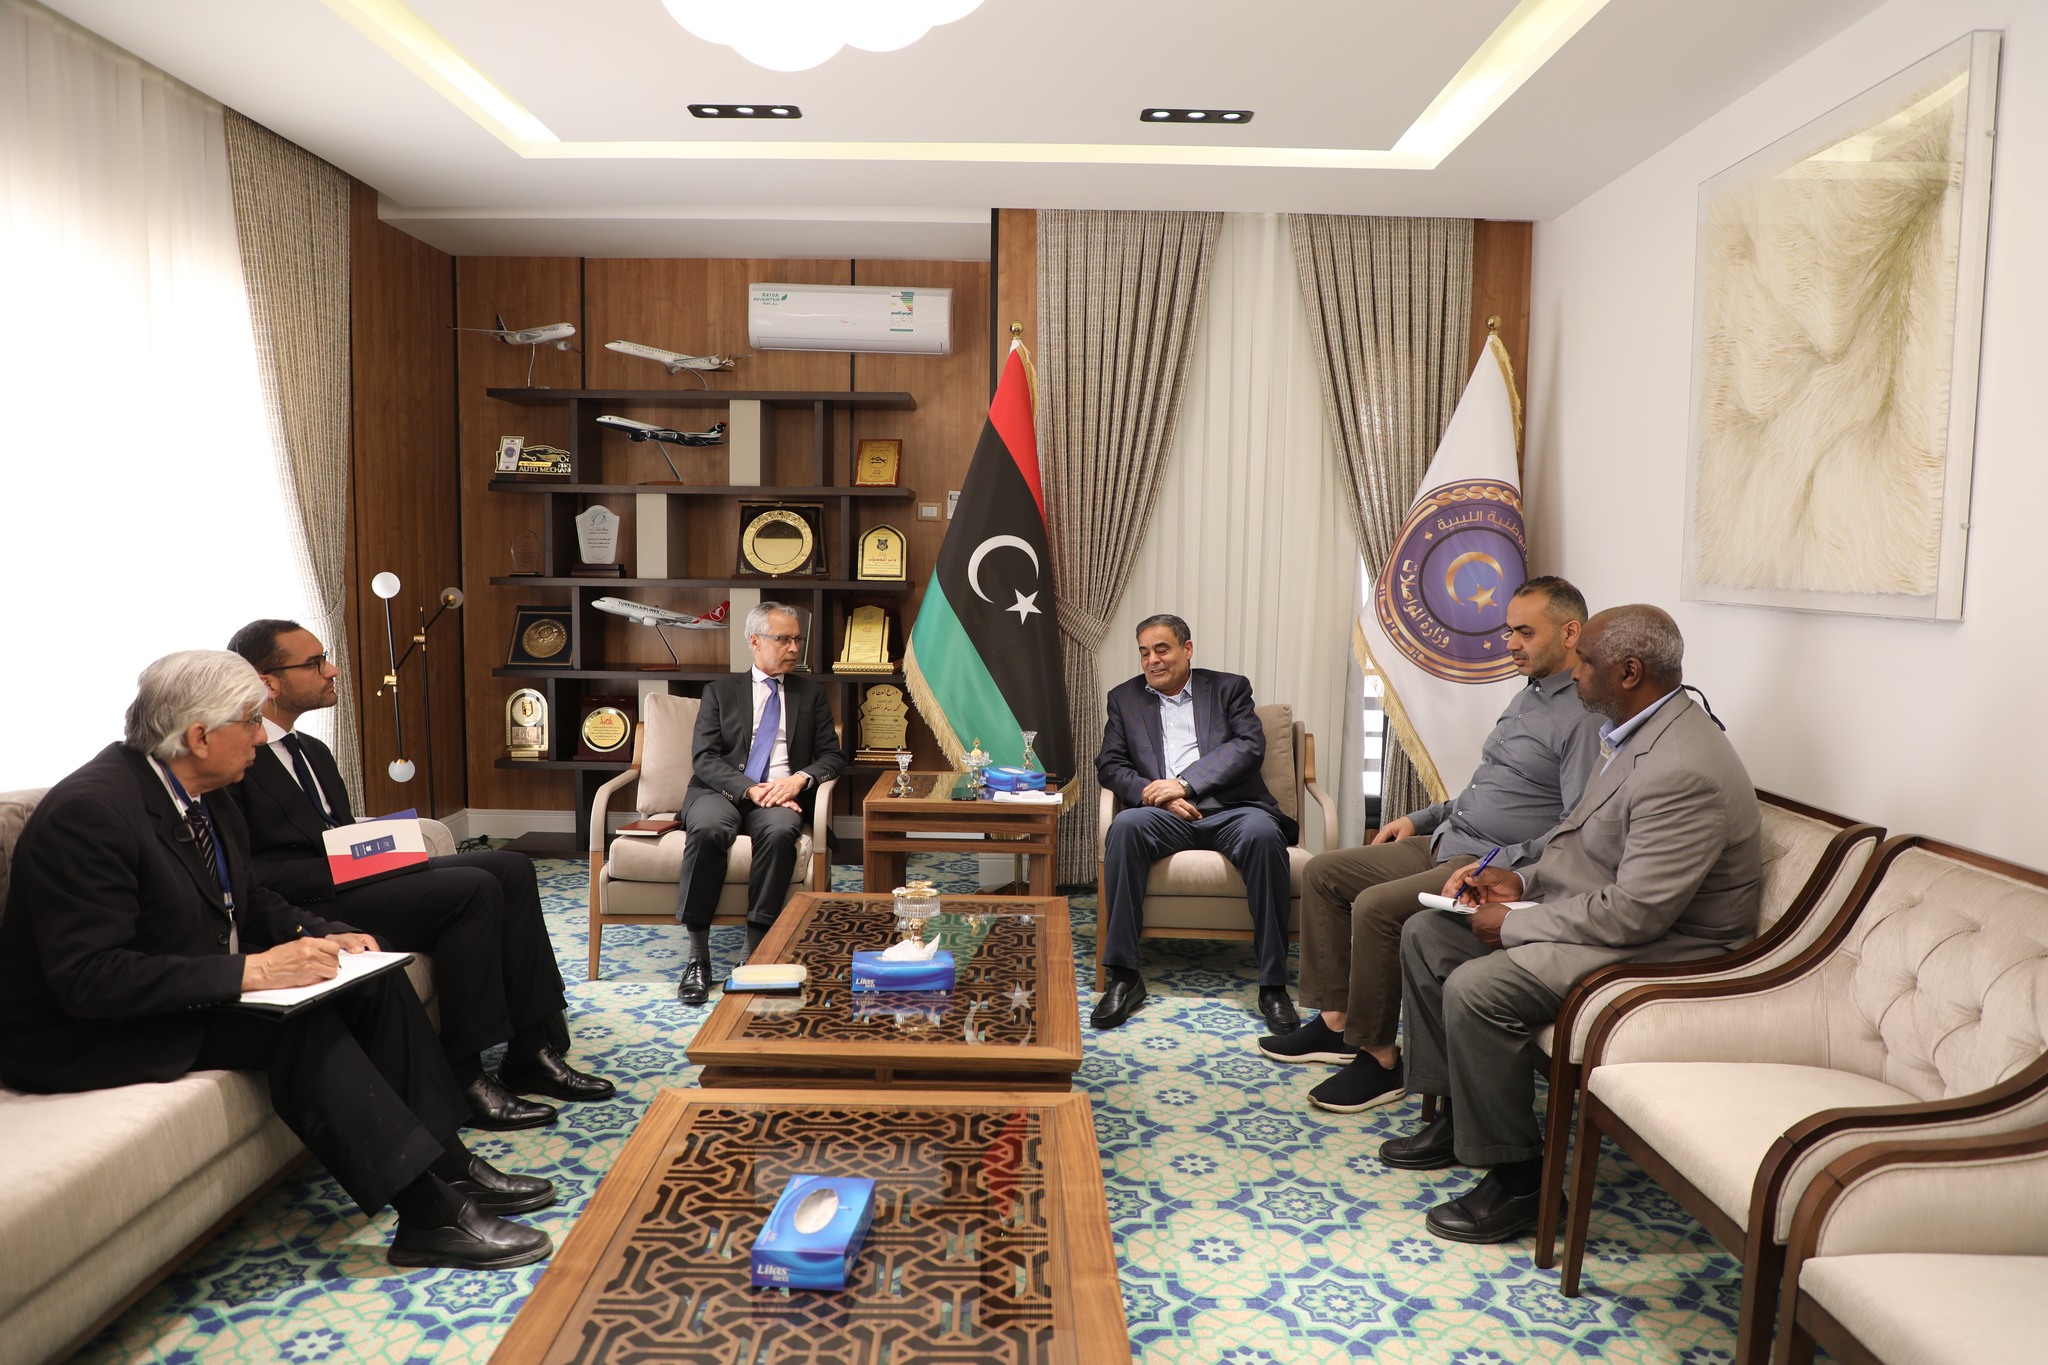 Al-Shahoubi calls on French companies to return and work in the Libyan market and contribute to development and reconstruction projects